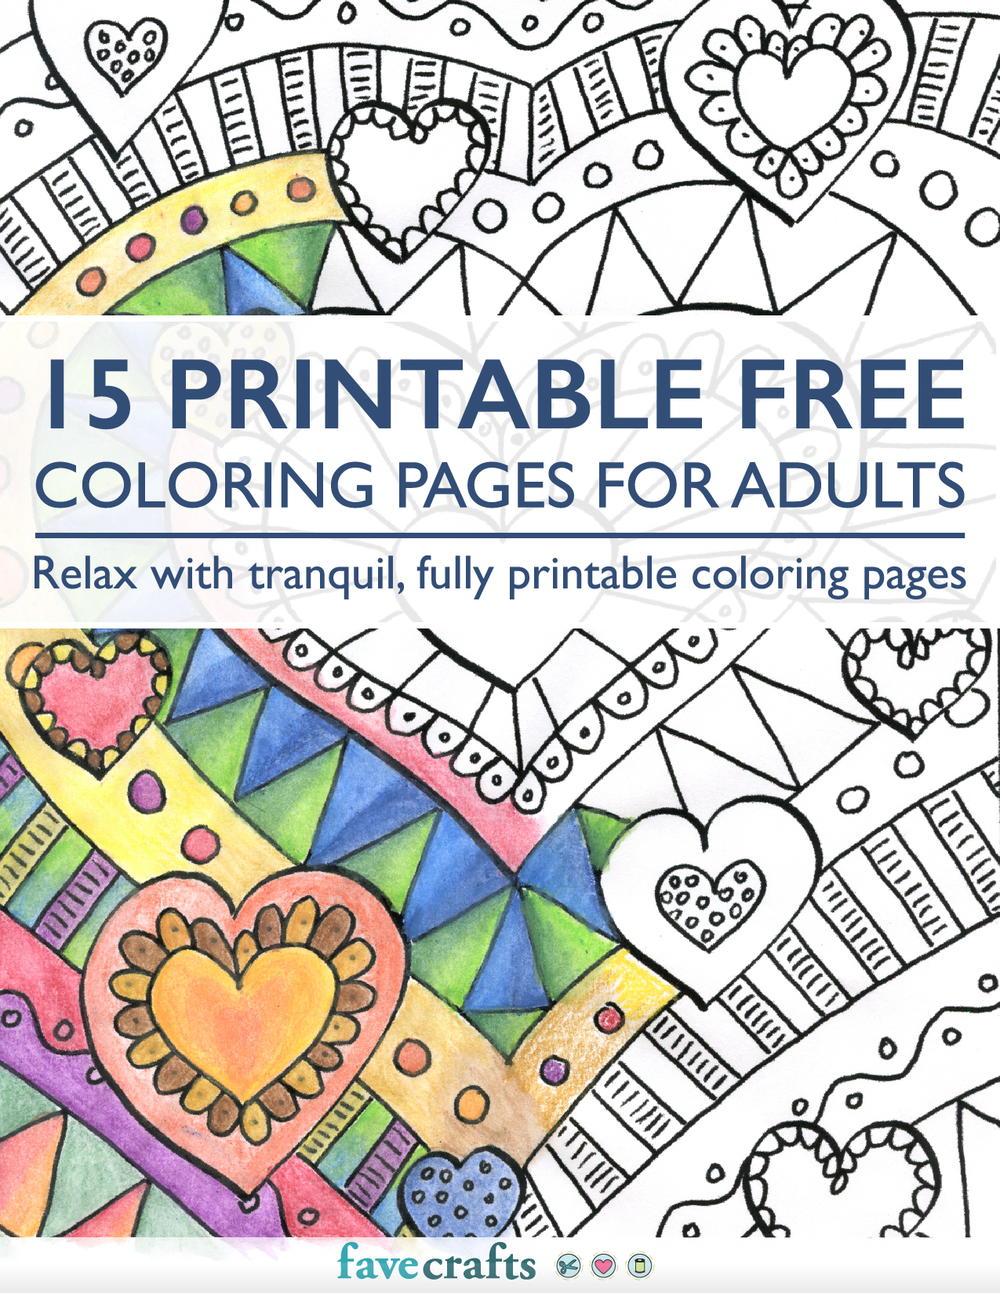 15 Printable Free Coloring Pages for Adults [PDF ...